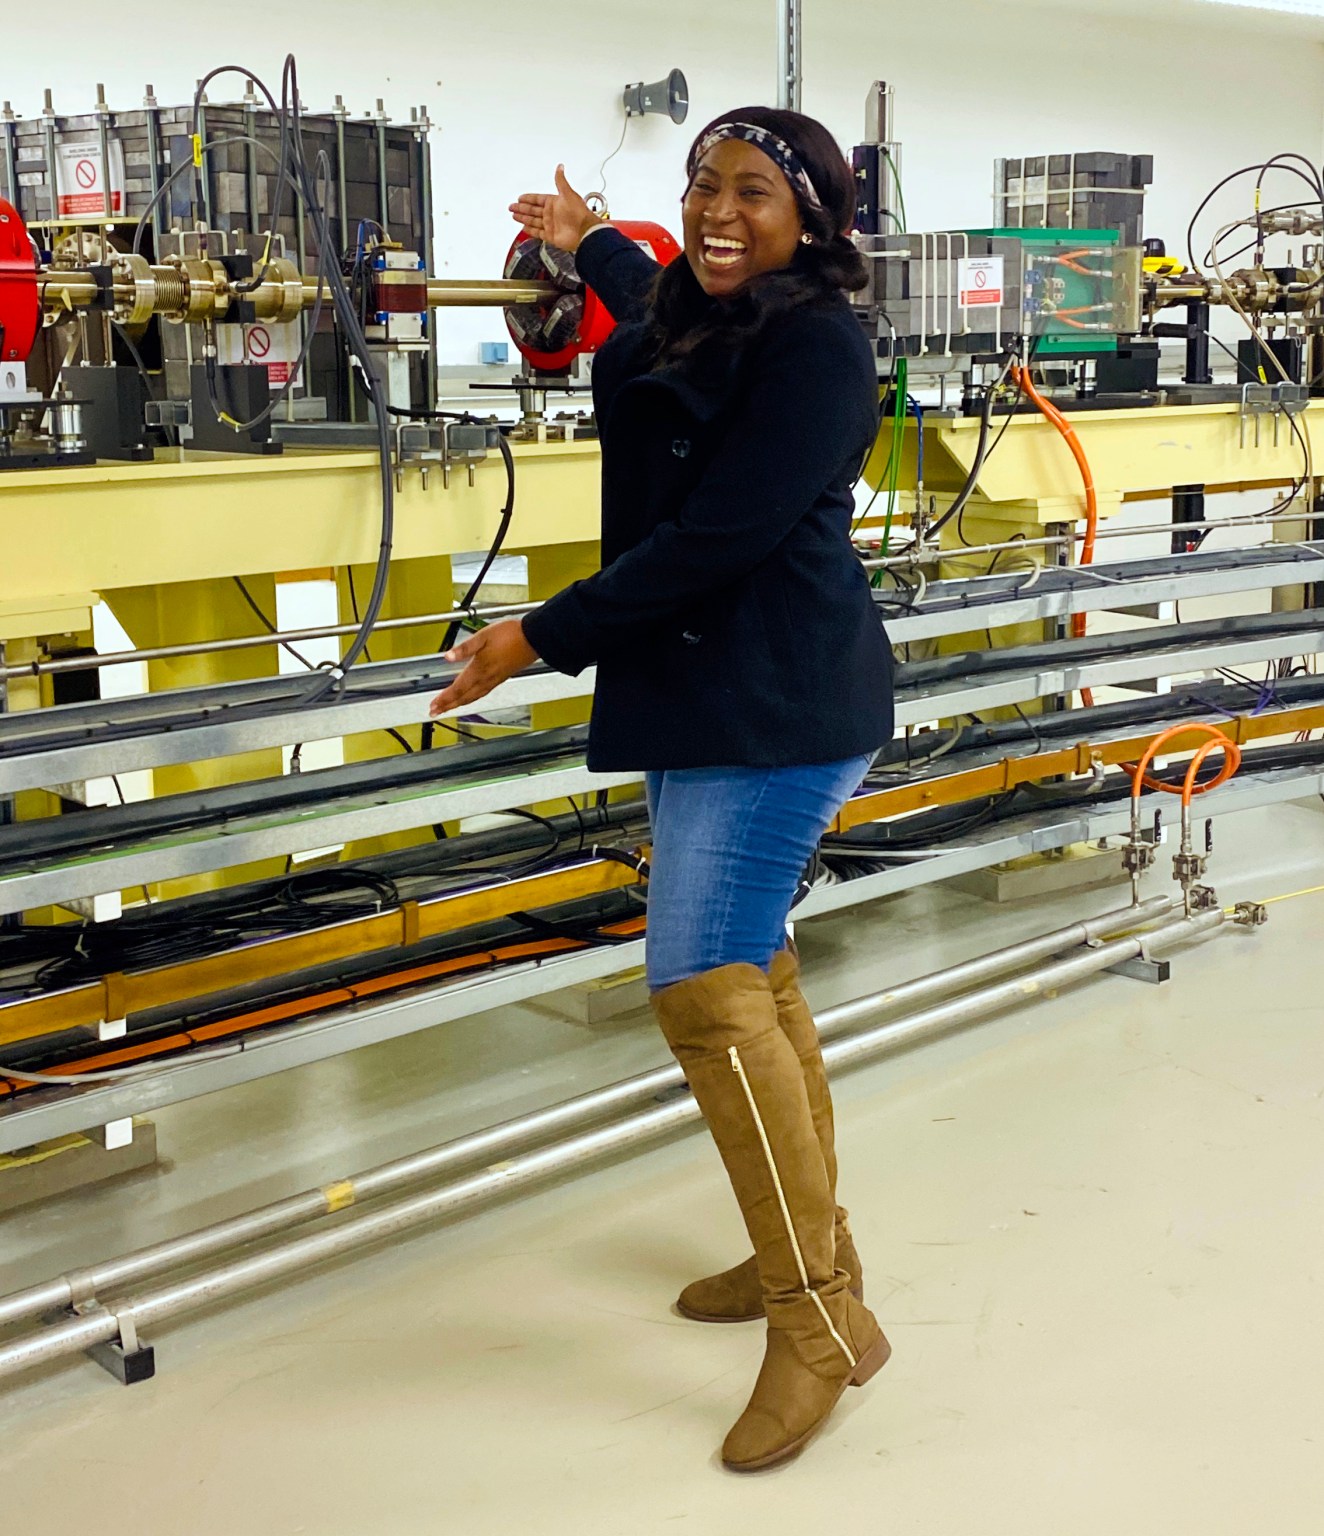 Gugulethu Nkala, energy materials PhD student at the University of the Witwatersrand, South Africa, on a workshop tour of Diamond in March 2020. Here Gugu is looking at the large red magnets that are part of the linear accelerator at Diamond on a visit to the Diamond synchrotron funded by the GCRF START grant.  The electron beams travel through the linear accelerator and are used to investigate the samples provided by the scientists for their experiments. Photo credit: Gugulethu Nkala.